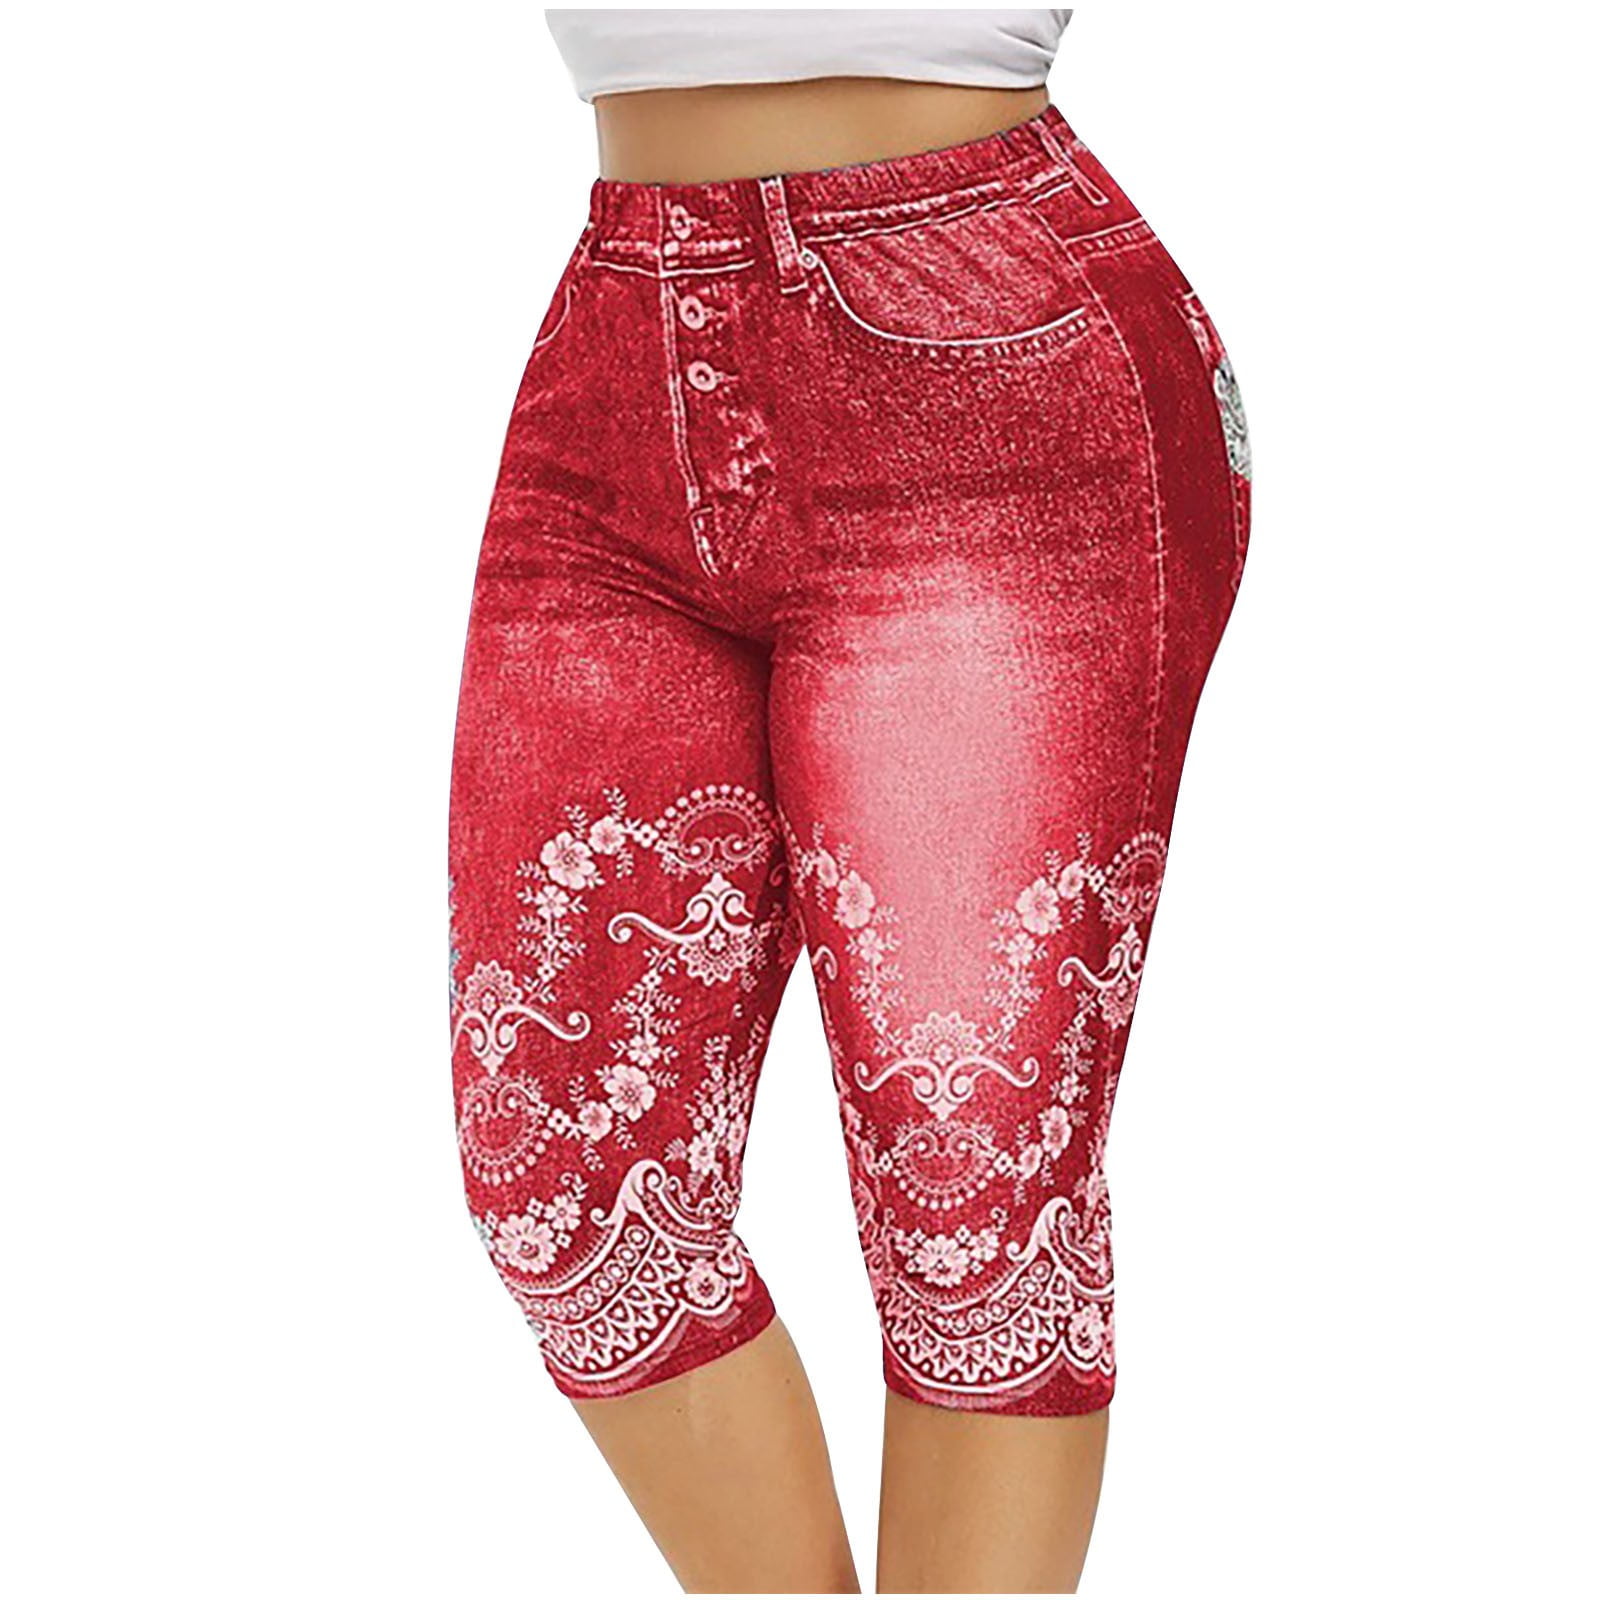  Special Deals Yoga Pants Women Tummy Control Jeans Red